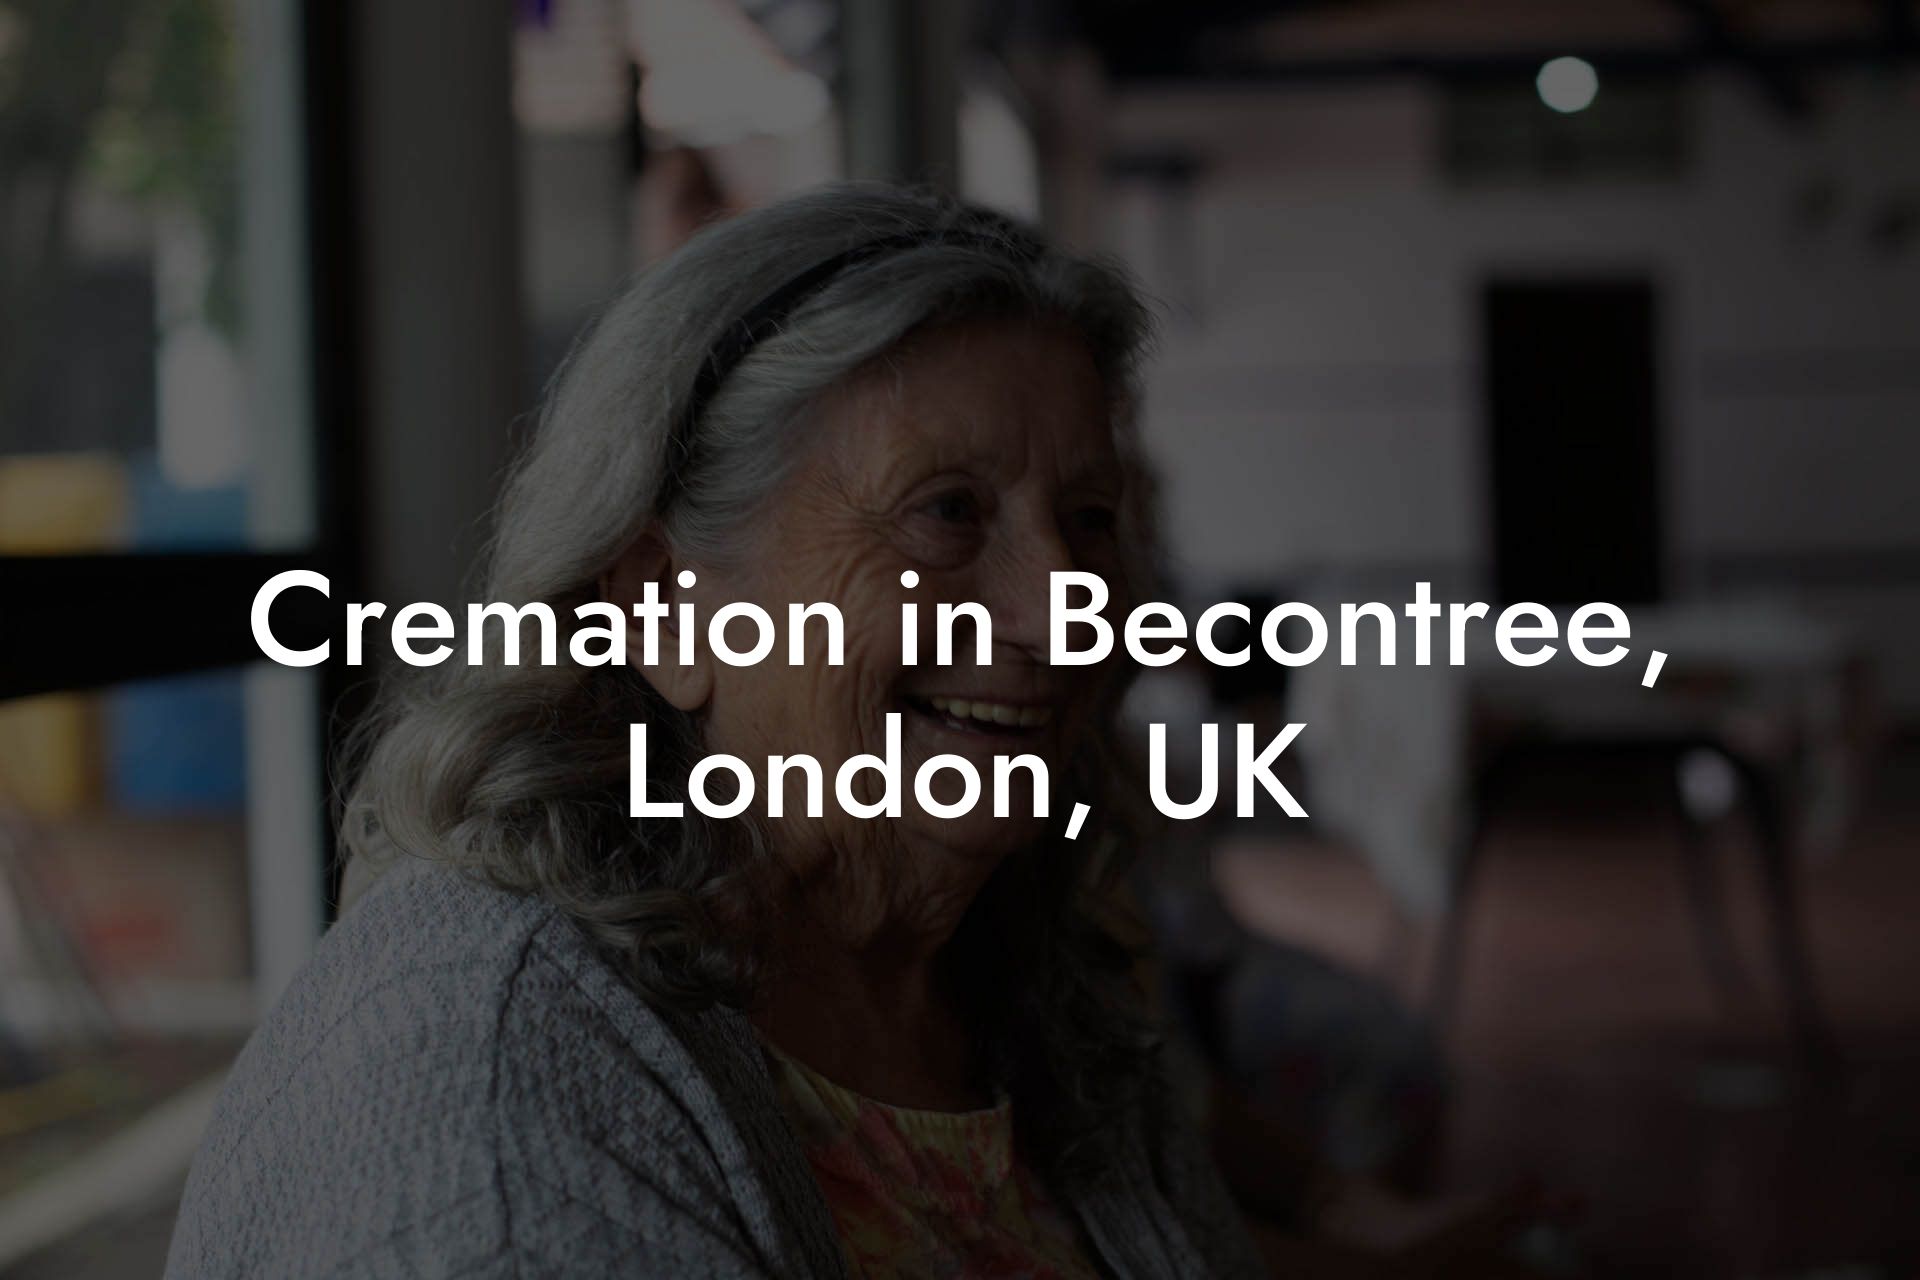 Cremation in Becontree, London, UK